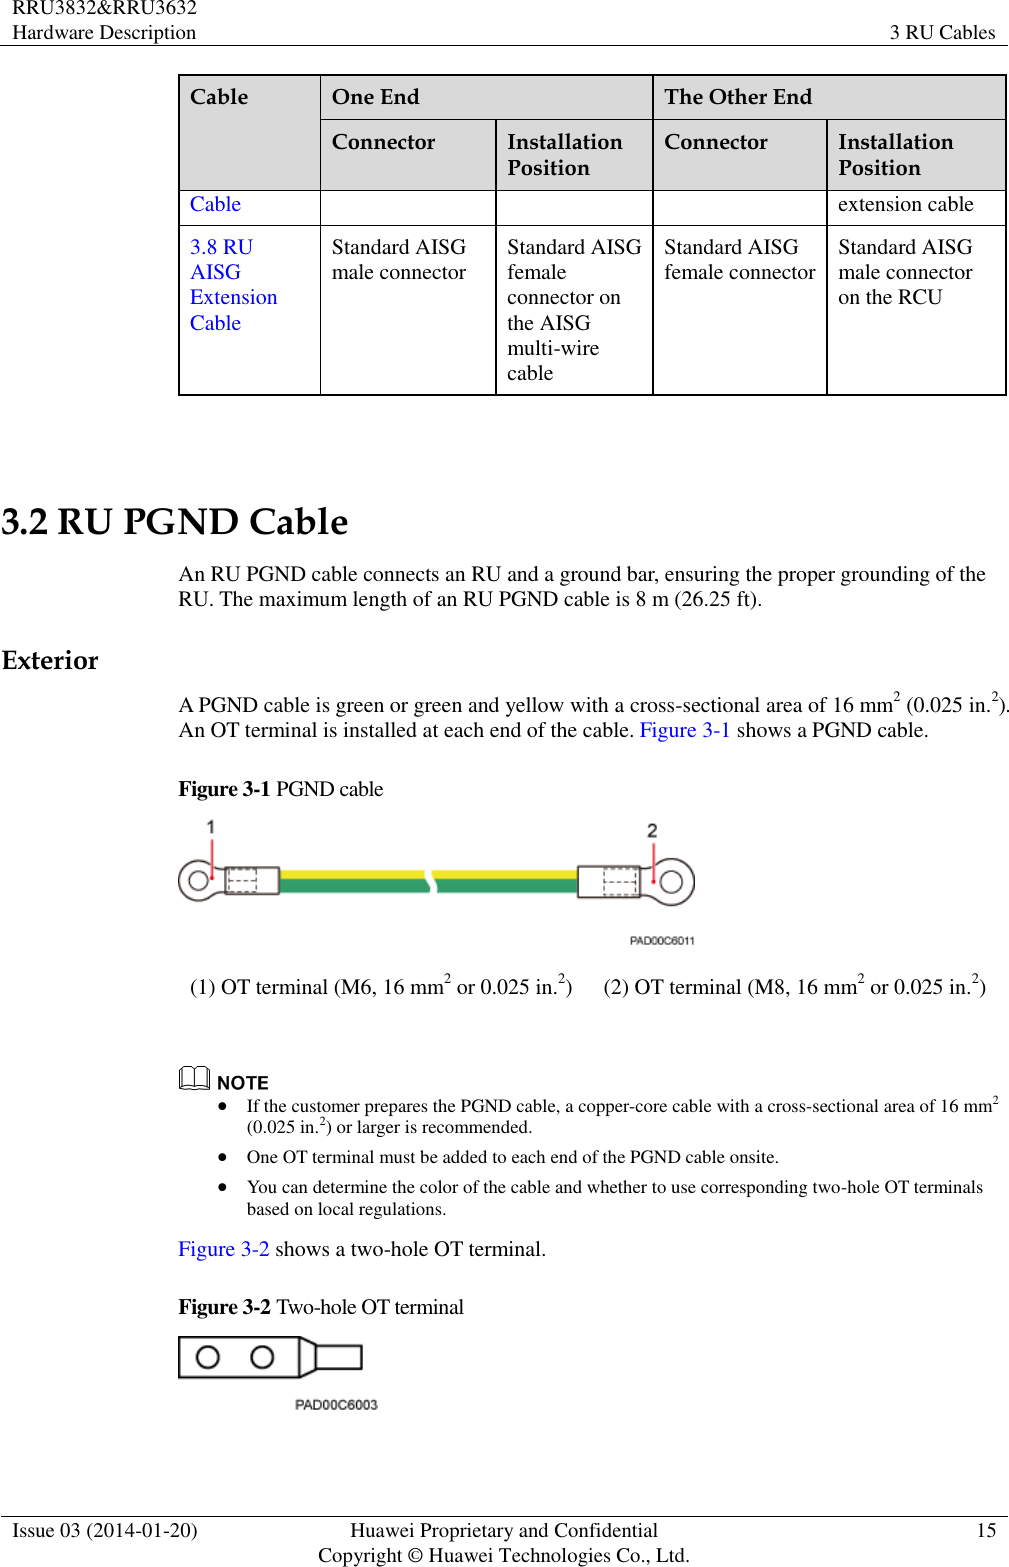 RRU3832&amp;RRU3632 Hardware Description 3 RU Cables  Issue 03 (2014-01-20) Huawei Proprietary and Confidential                                     Copyright © Huawei Technologies Co., Ltd. 15  Cable One End The Other End Connector Installation Position Connector Installation Position Cable extension cable 3.8 RU AISG Extension Cable Standard AISG male connector Standard AISG female connector on the AISG multi-wire cable Standard AISG female connector Standard AISG male connector on the RCU  3.2 RU PGND Cable An RU PGND cable connects an RU and a ground bar, ensuring the proper grounding of the RU. The maximum length of an RU PGND cable is 8 m (26.25 ft). Exterior A PGND cable is green or green and yellow with a cross-sectional area of 16 mm2 (0.025 in.2). An OT terminal is installed at each end of the cable. Figure 3-1 shows a PGND cable. Figure 3-1 PGND cable  (1) OT terminal (M6, 16 mm2 or 0.025 in.2) (2) OT terminal (M8, 16 mm2 or 0.025 in.2)    If the customer prepares the PGND cable, a copper-core cable with a cross-sectional area of 16 mm2 (0.025 in.2) or larger is recommended.  One OT terminal must be added to each end of the PGND cable onsite.  You can determine the color of the cable and whether to use corresponding two-hole OT terminals based on local regulations. Figure 3-2 shows a two-hole OT terminal. Figure 3-2 Two-hole OT terminal   